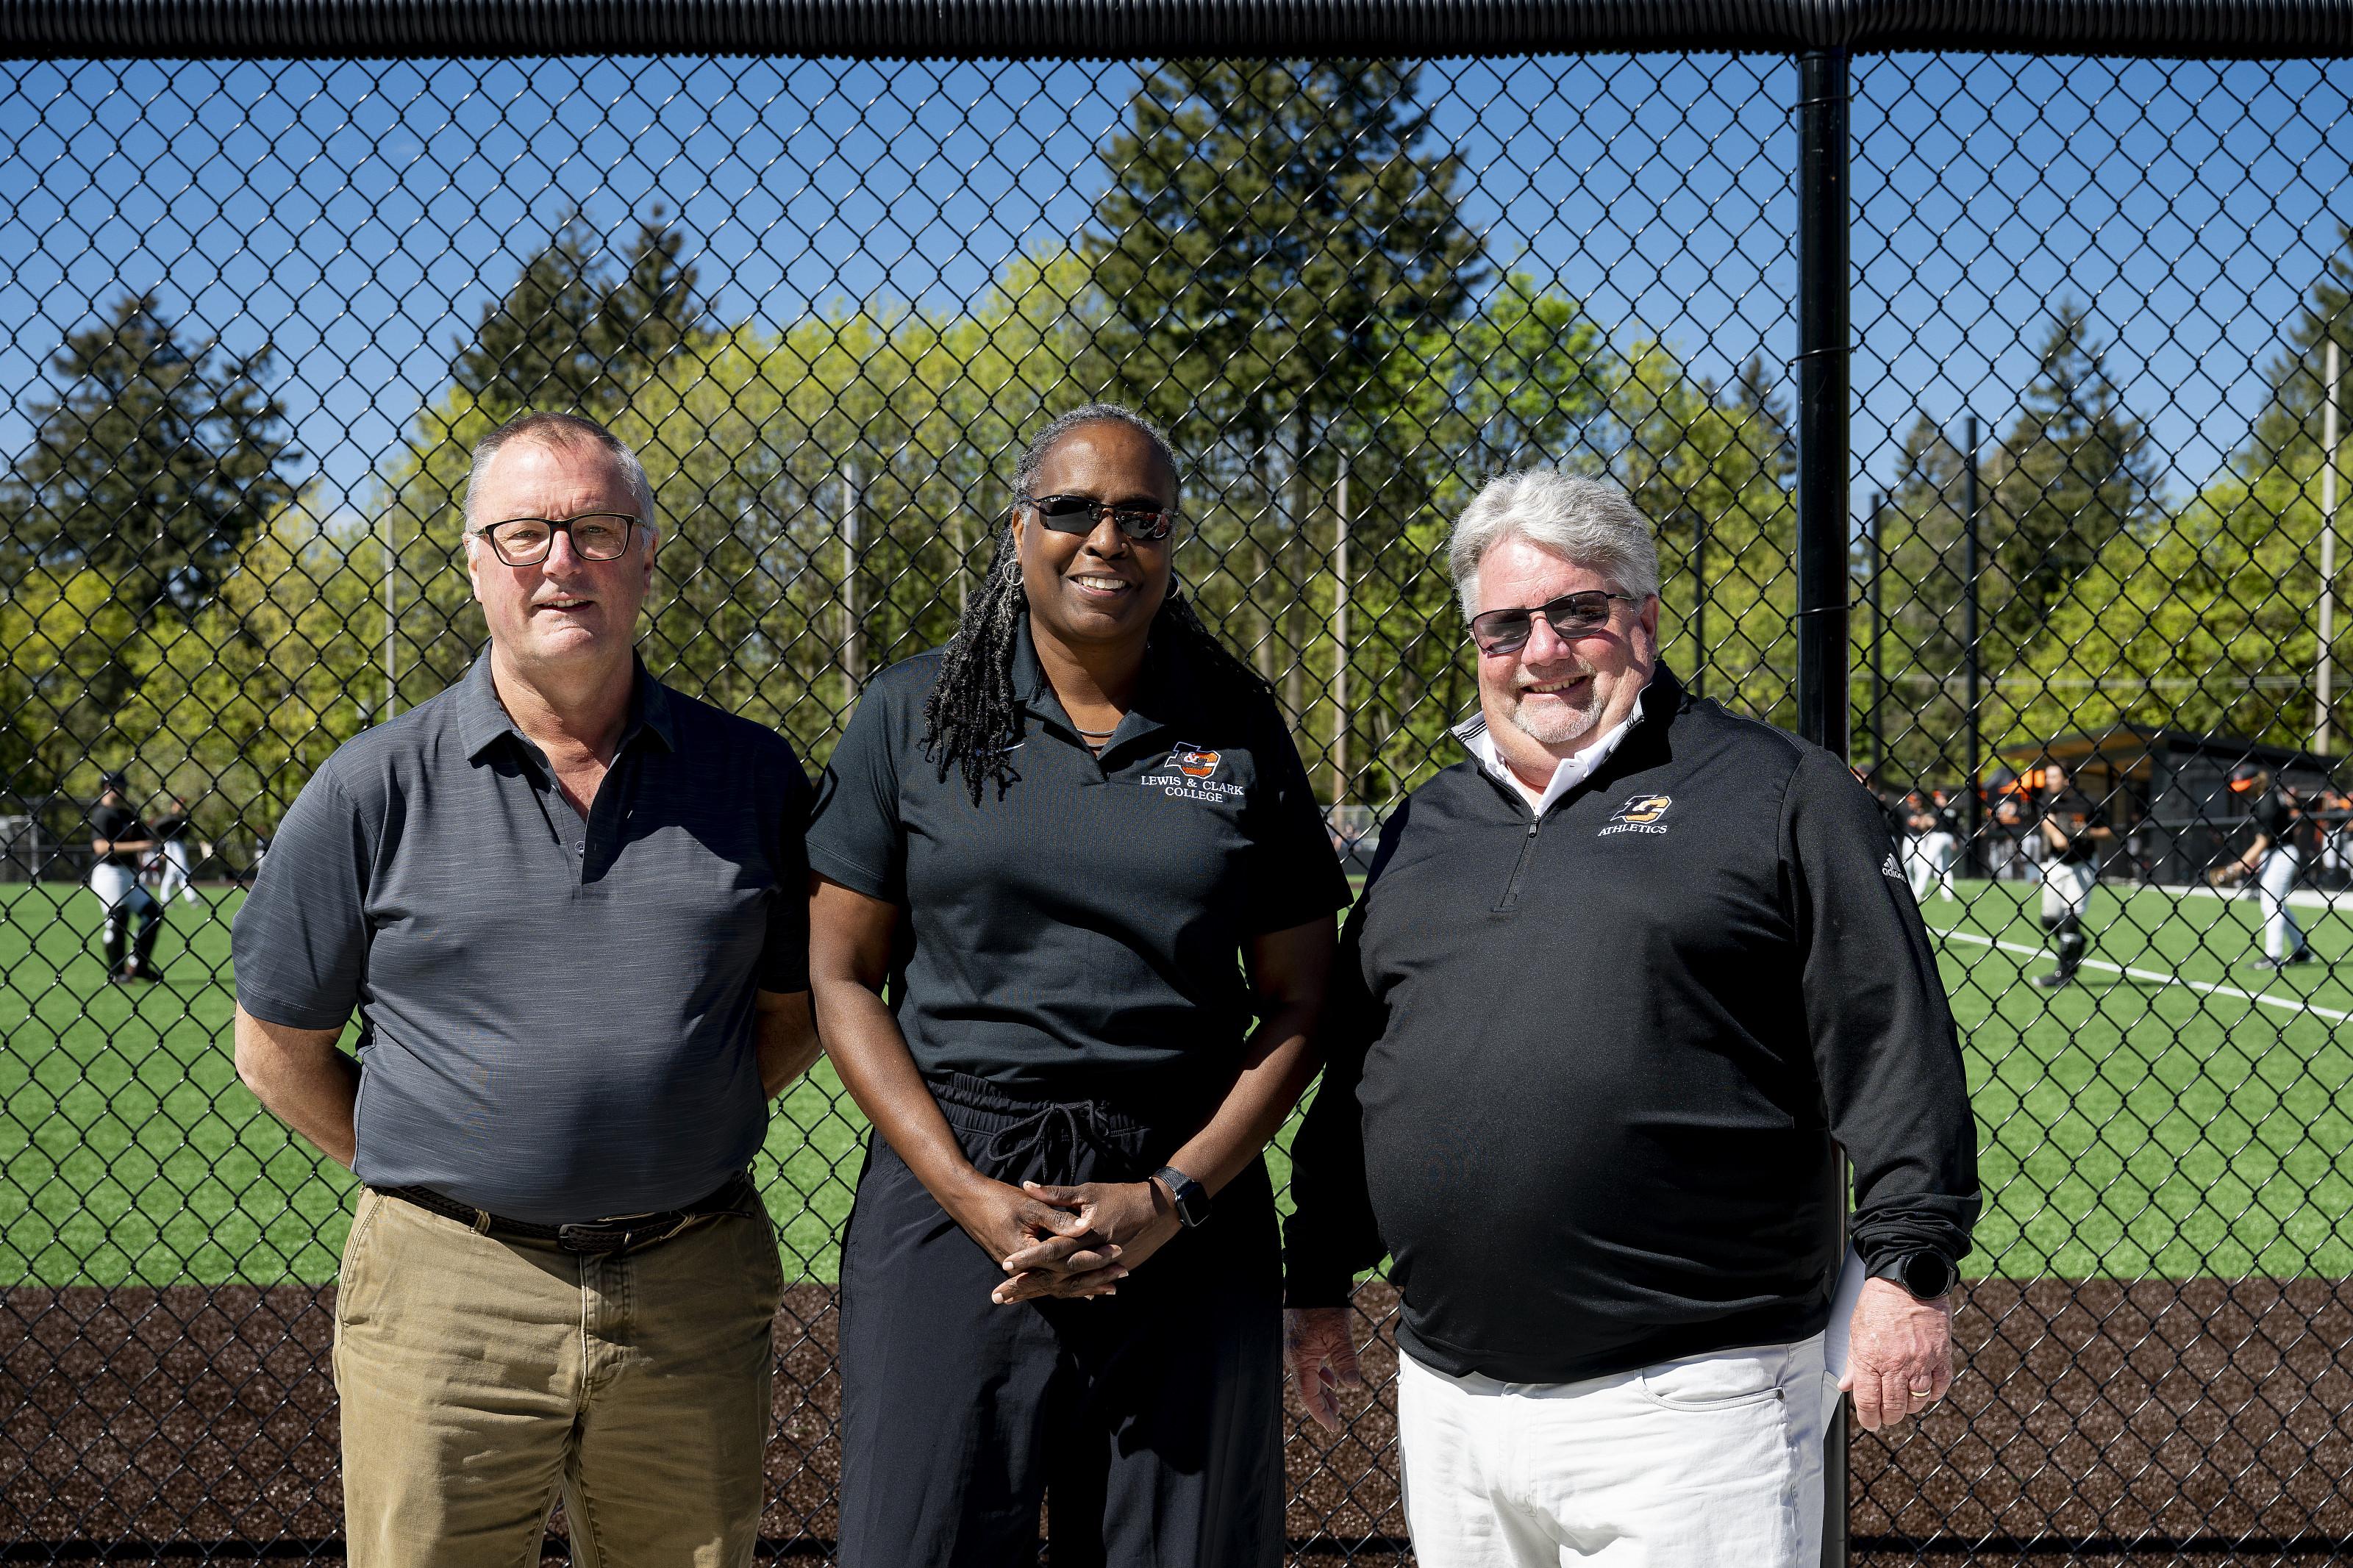 President Robin Holmes-Sullivan poses with Mark Pietrok and Jim Spencer BA '85 in front of the baseball diamond.